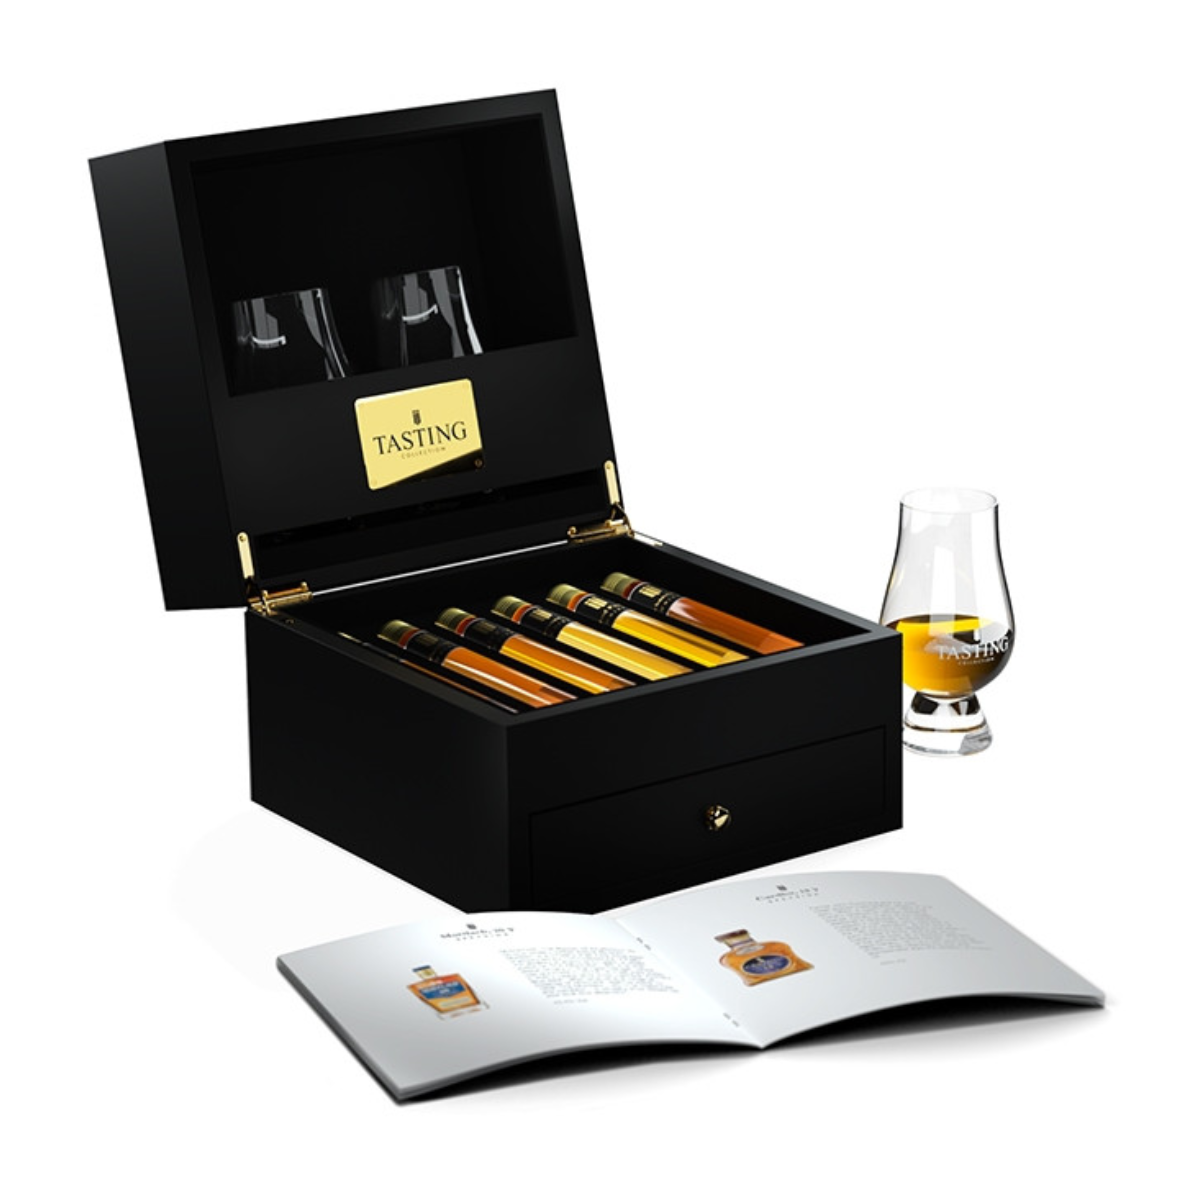 7. Raise a Glass to Love: Unforgettable Whiskey Tasting Set for Him on Your Anniversary